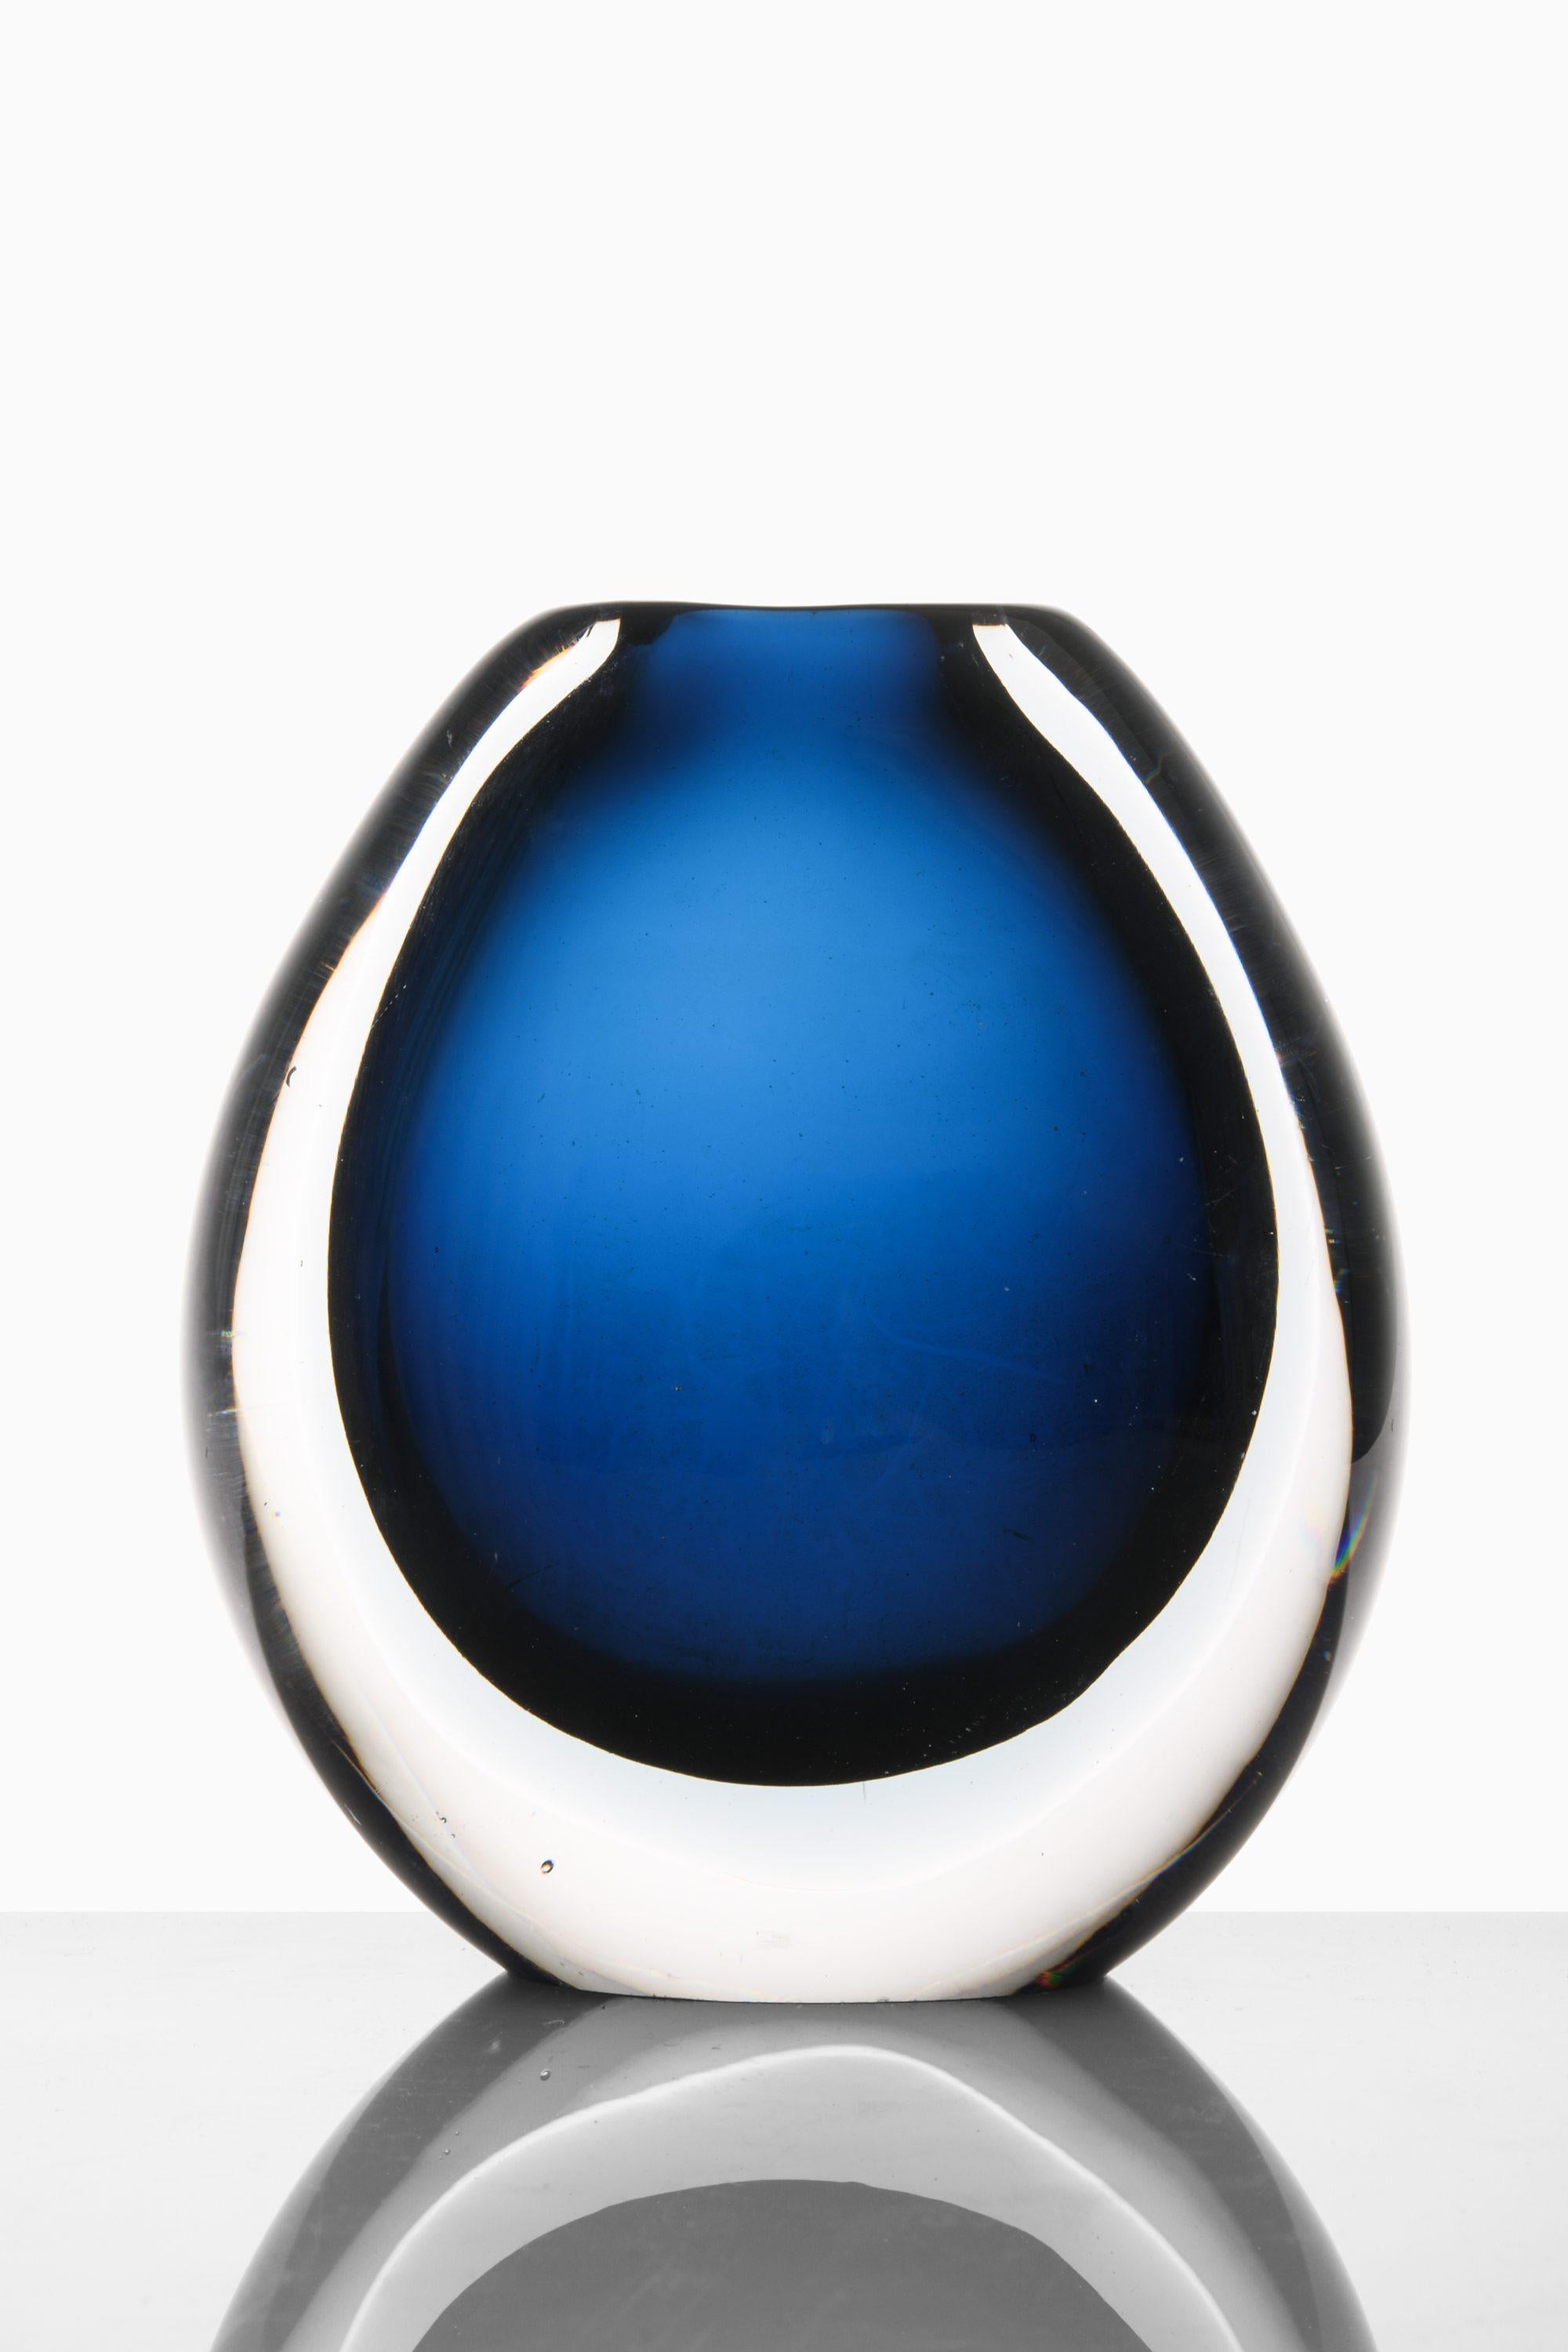 Swedish Round Glass Vase in Blue by Vicke Lindstrand, 1960's For Sale